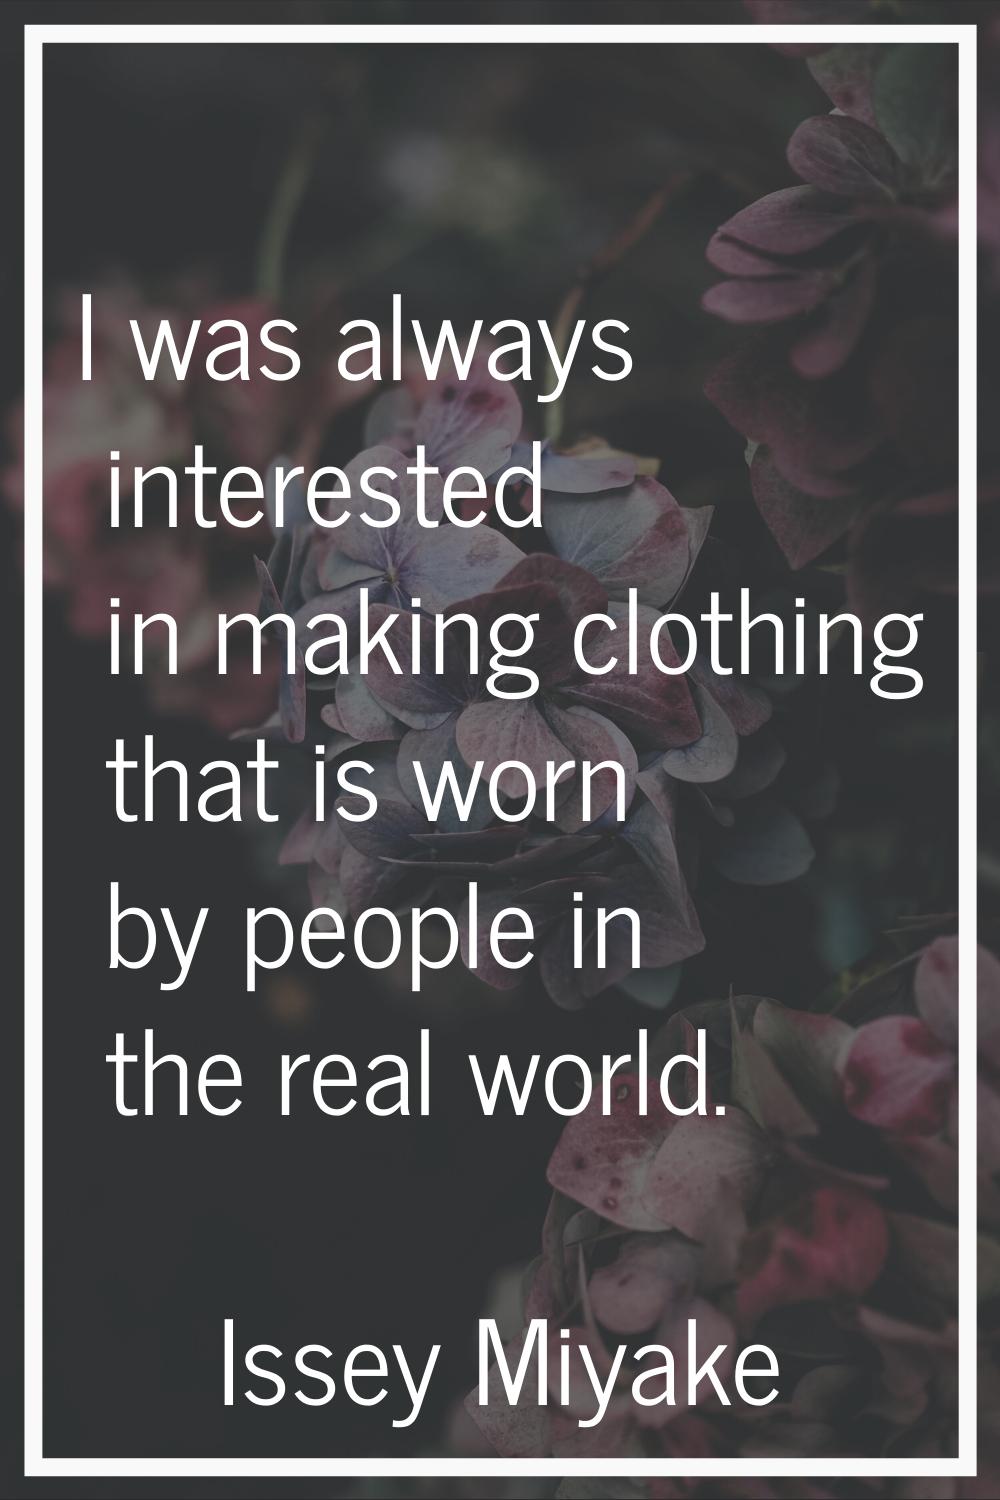 I was always interested in making clothing that is worn by people in the real world.